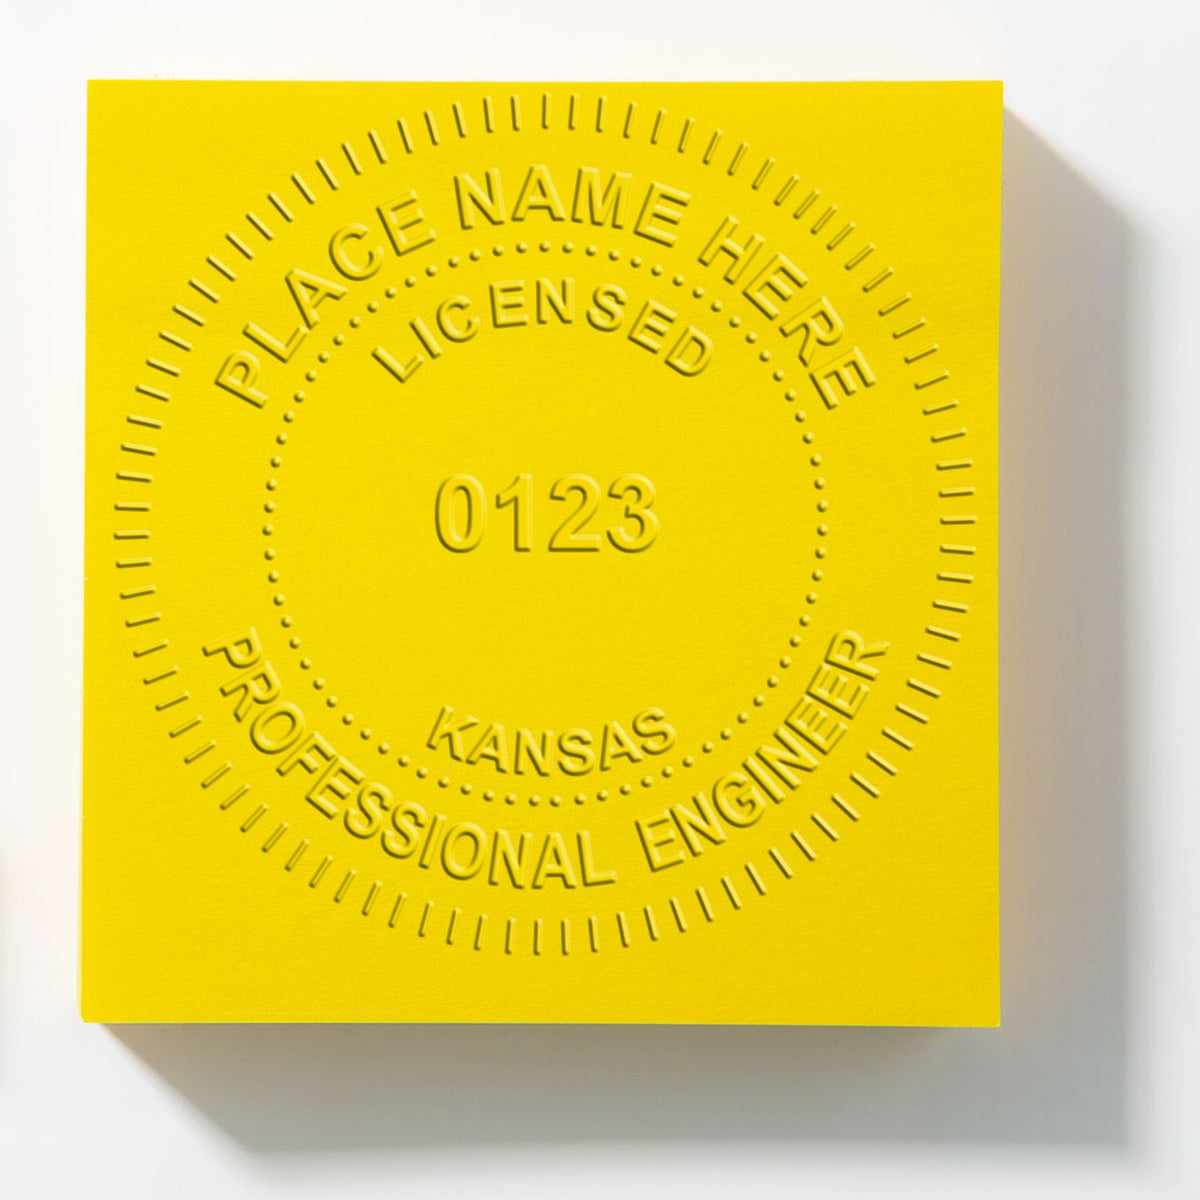 An alternative view of the Hybrid Kansas Engineer Seal stamped on a sheet of paper showing the image in use